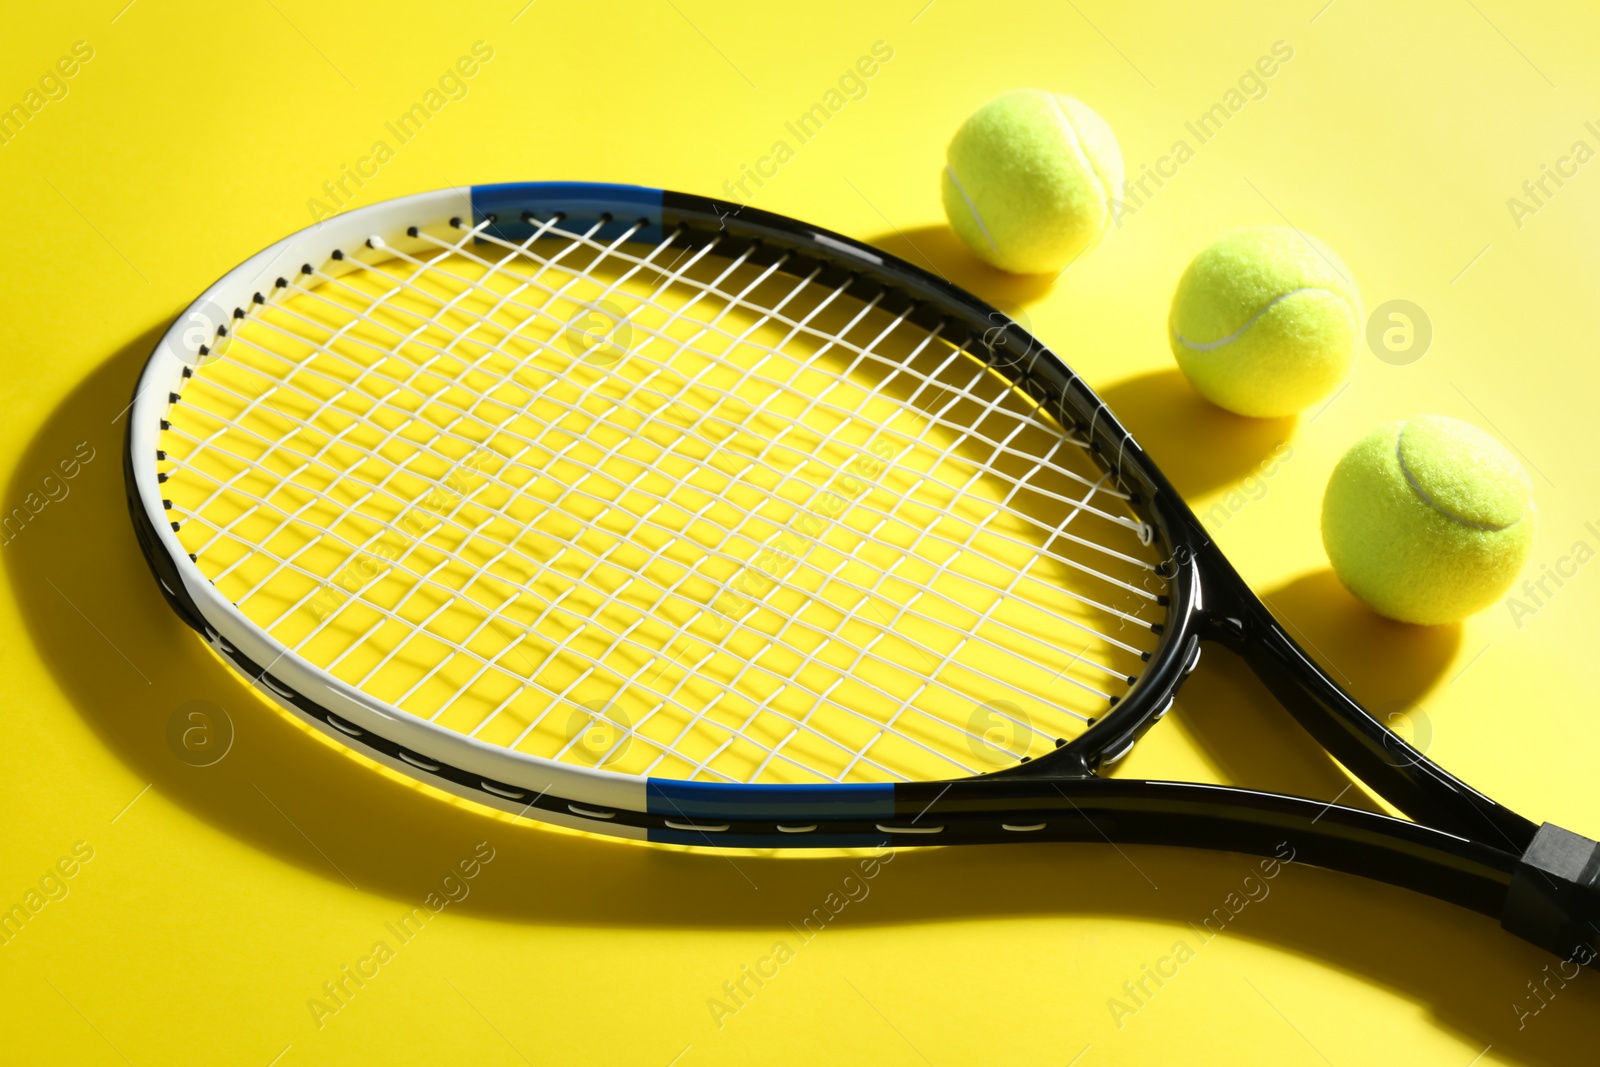 Photo of Tennis racket and balls on yellow background. Sports equipment